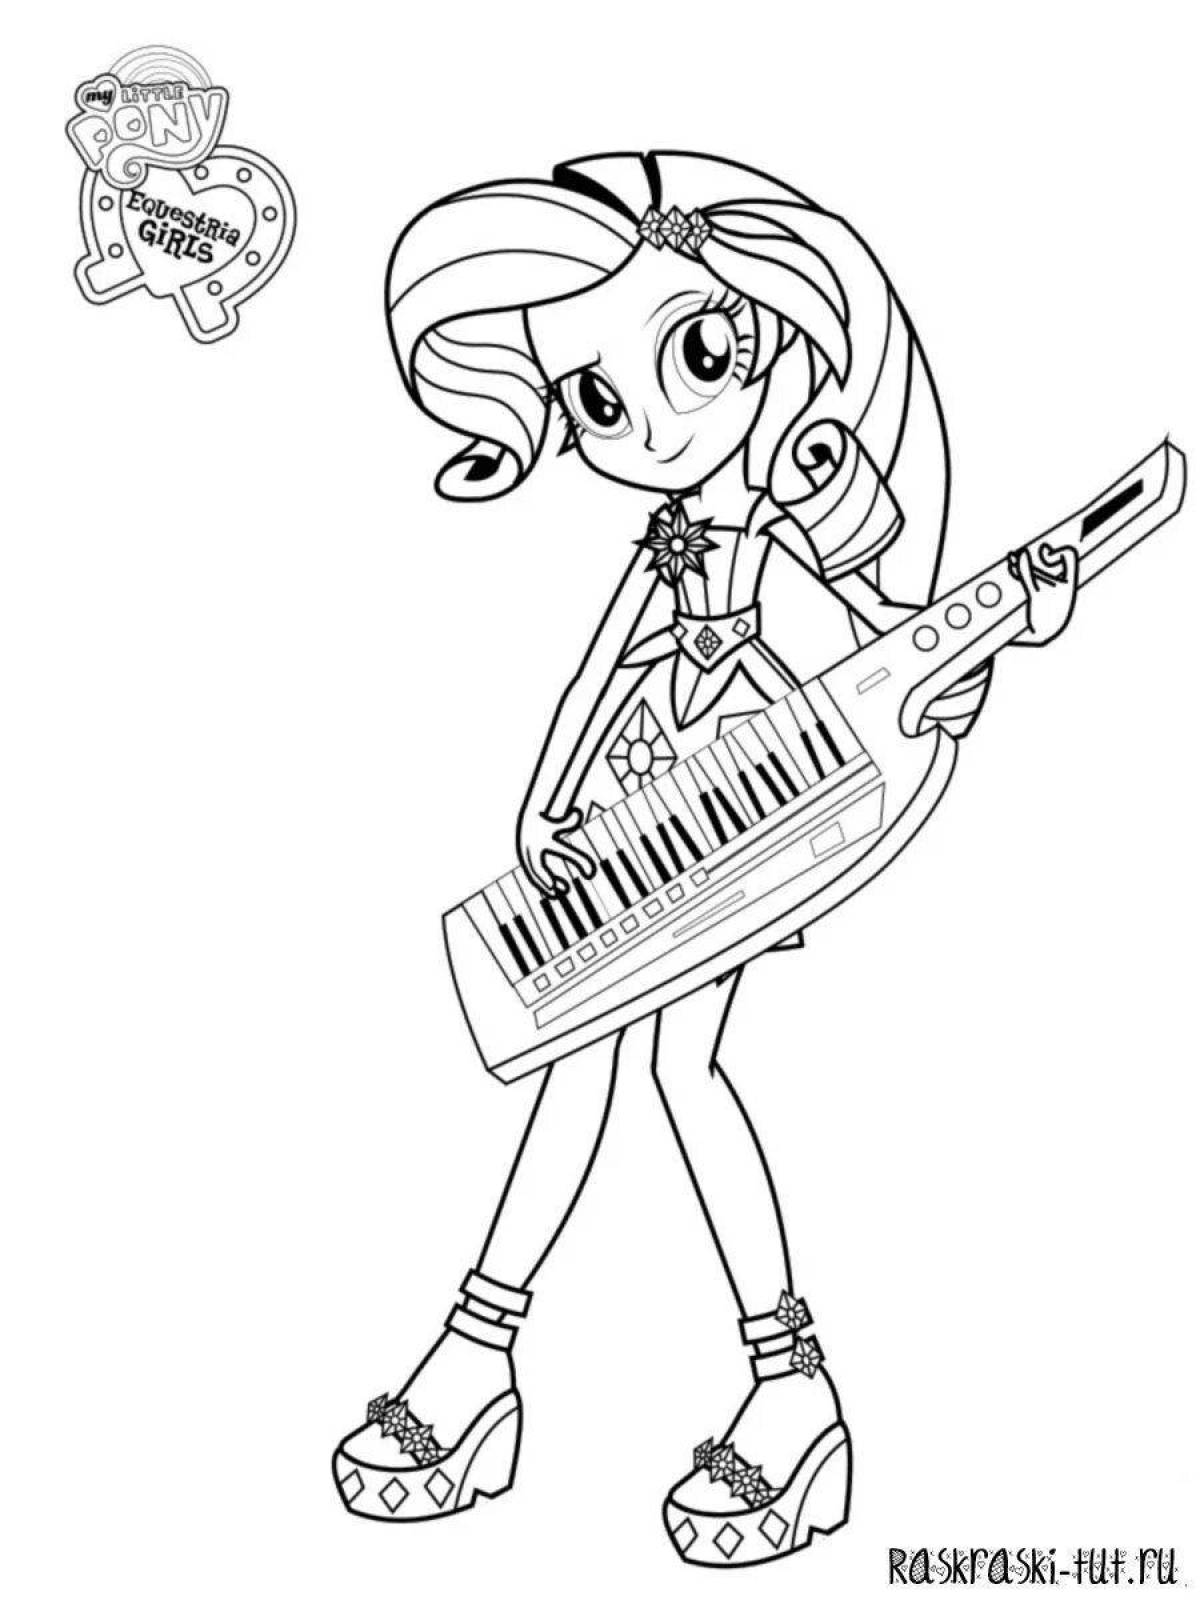 Awesome equestria girl sparkle coloring page